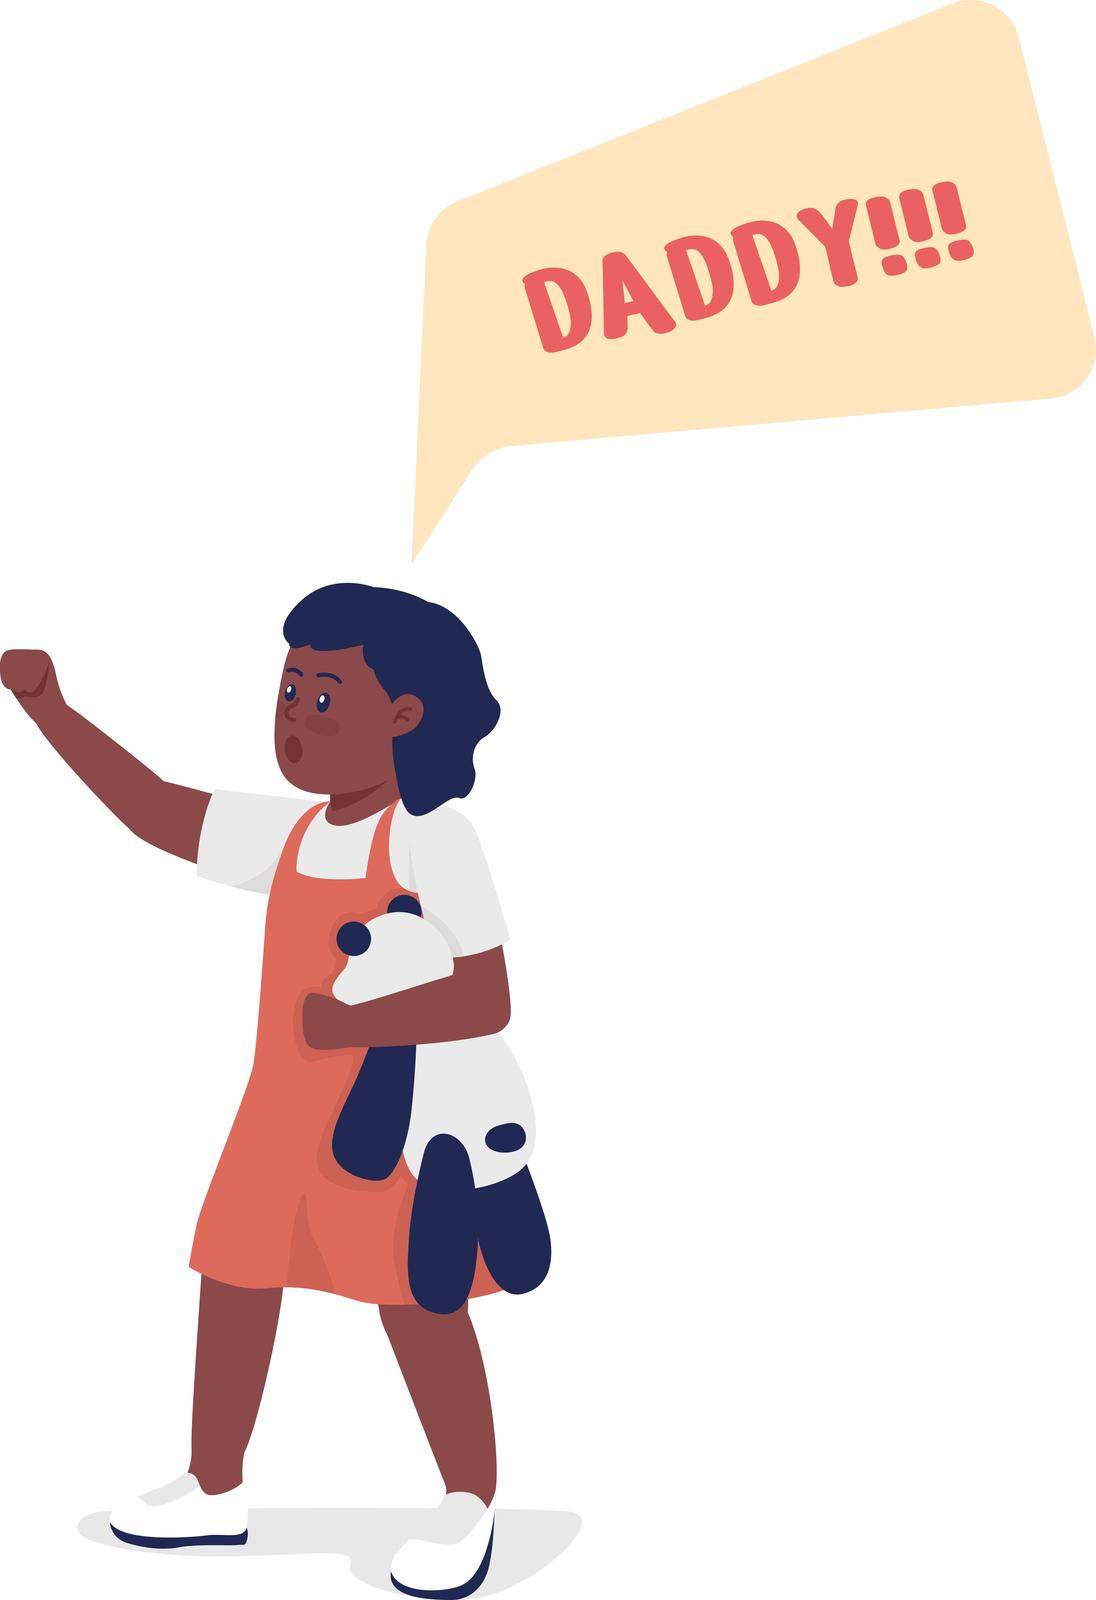 Toddler shout daddy semi flat color vector character by ntl